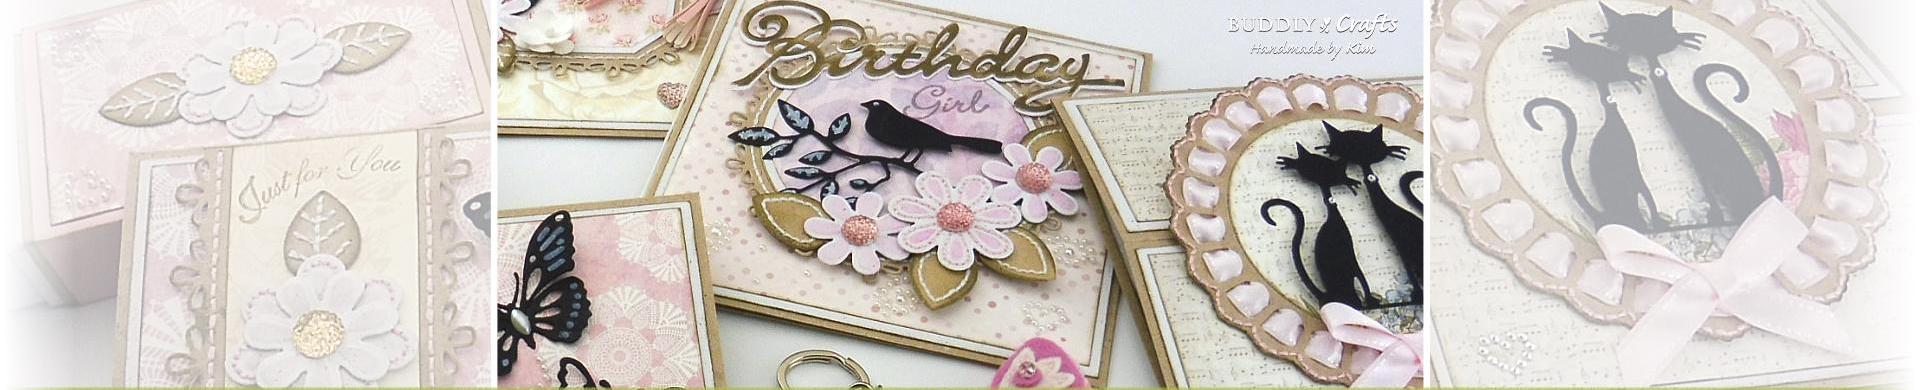 Die-Cutting & Embroidery Birthday Cards for Women